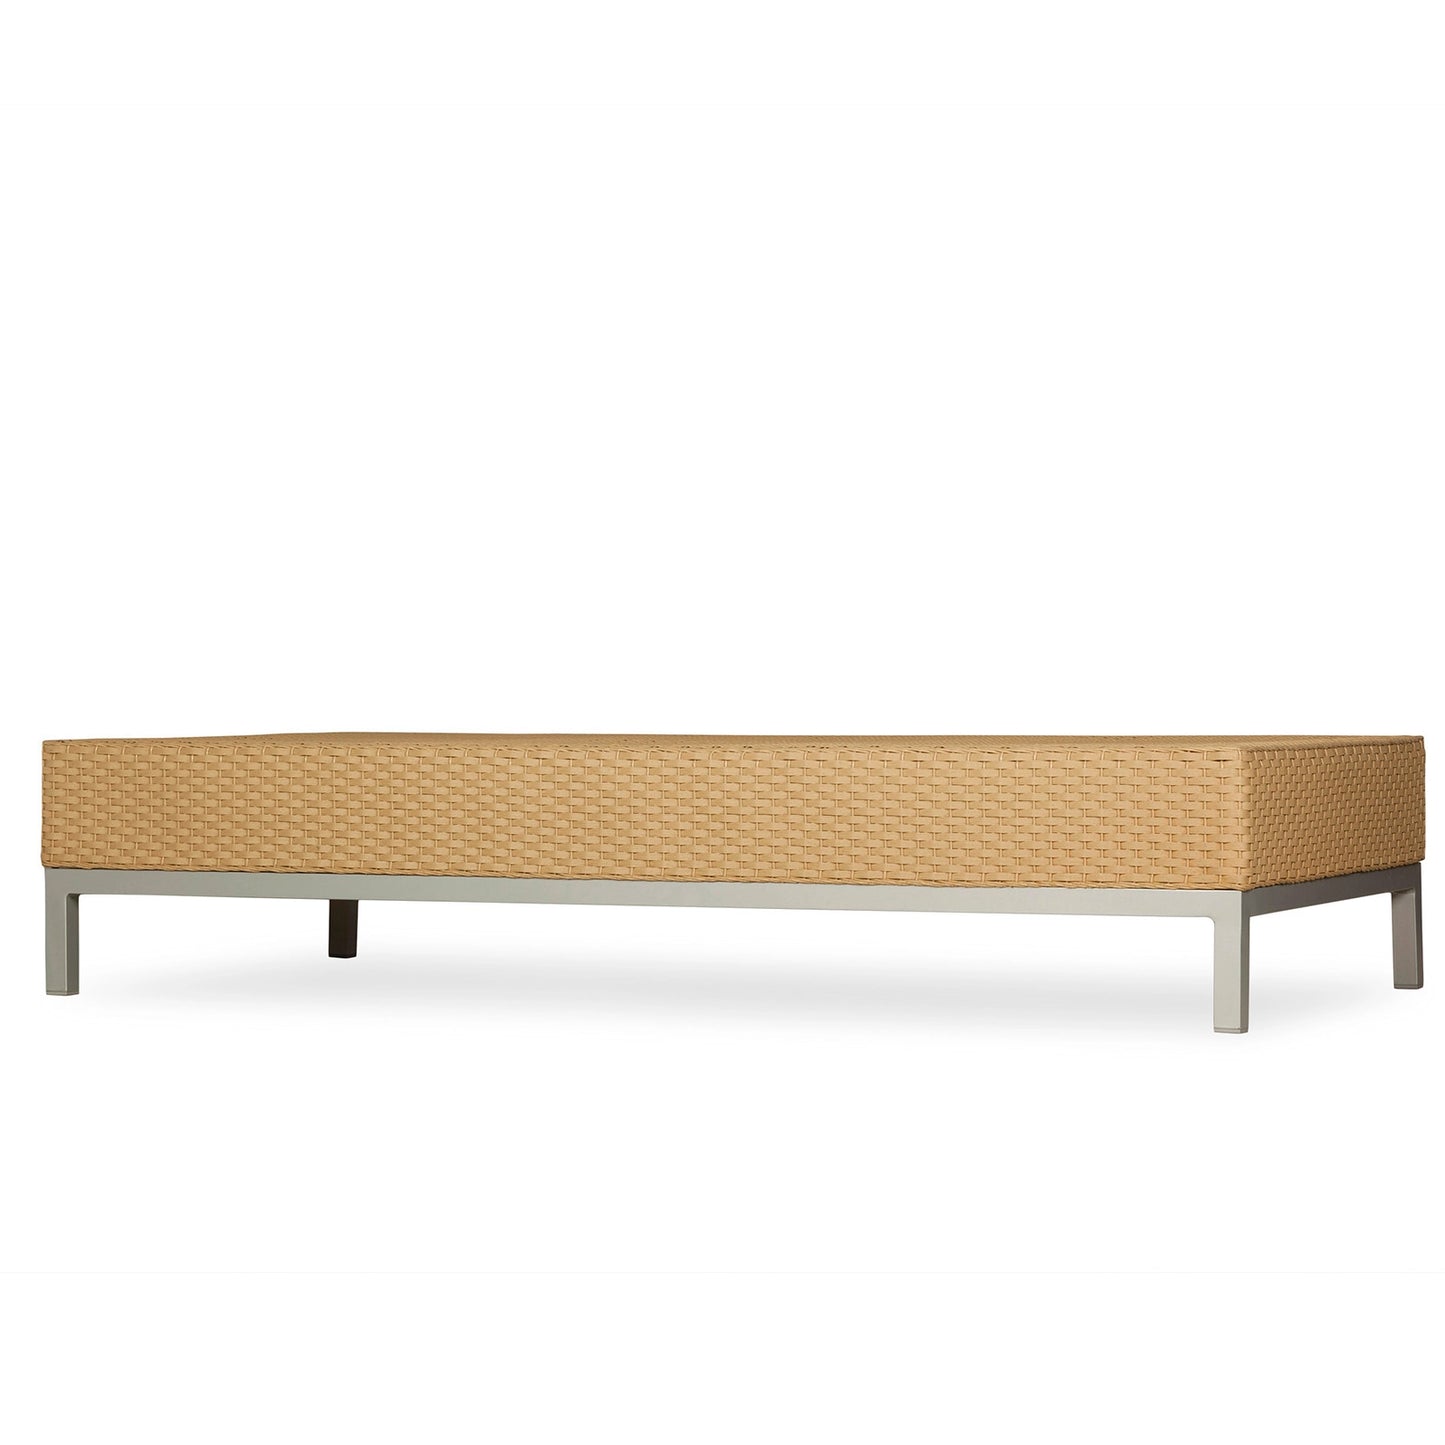 Elements 60" Rectangular Cocktail Table